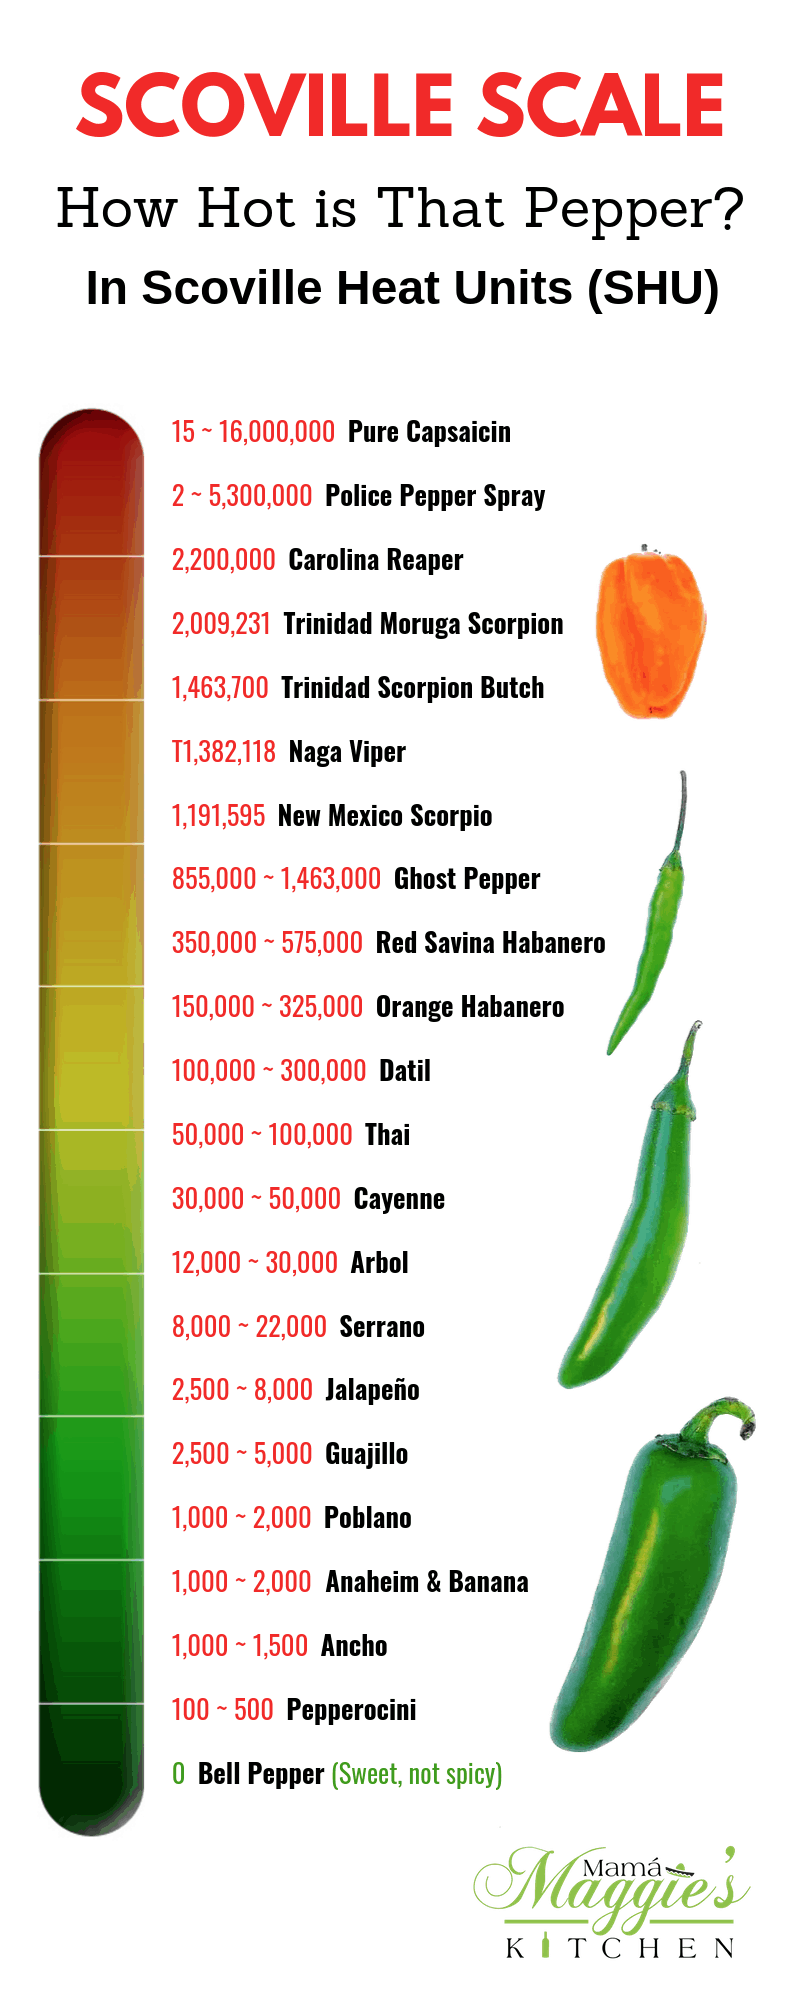 An infographic of the Scoville Scale showing chile peppers from hot to mildest.